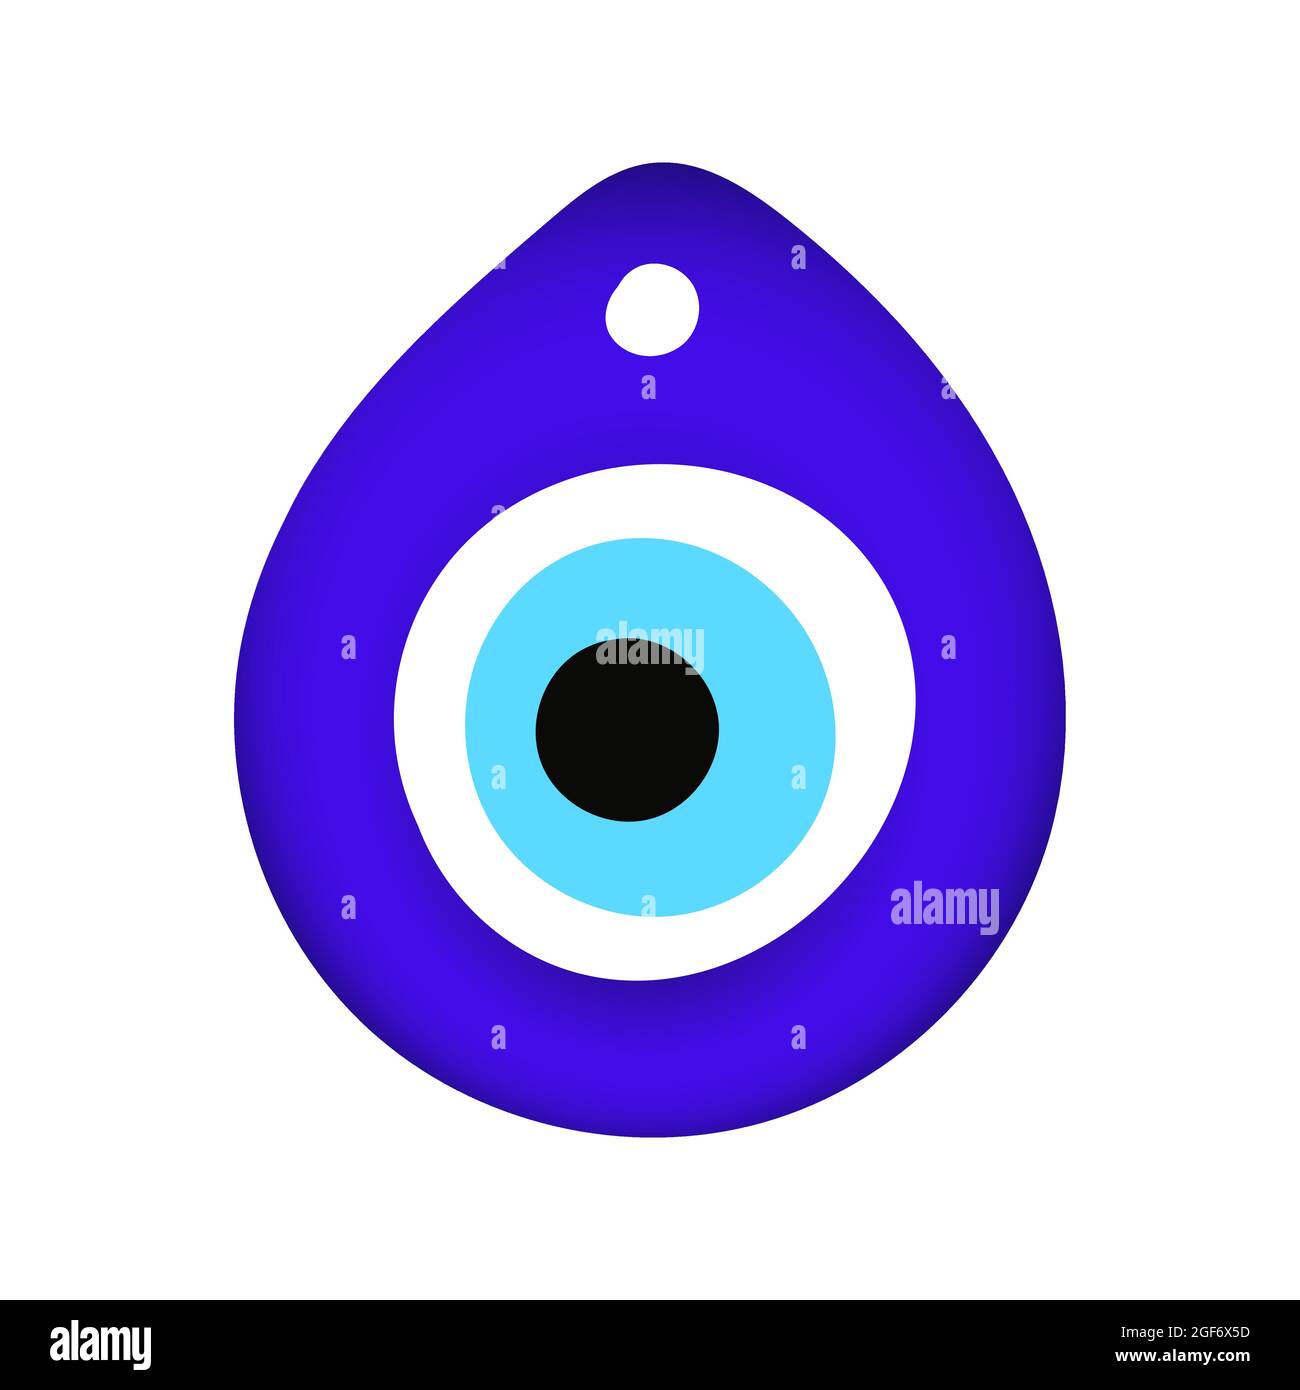 It's now an emoji, but what's the story of the evil eye amulet?